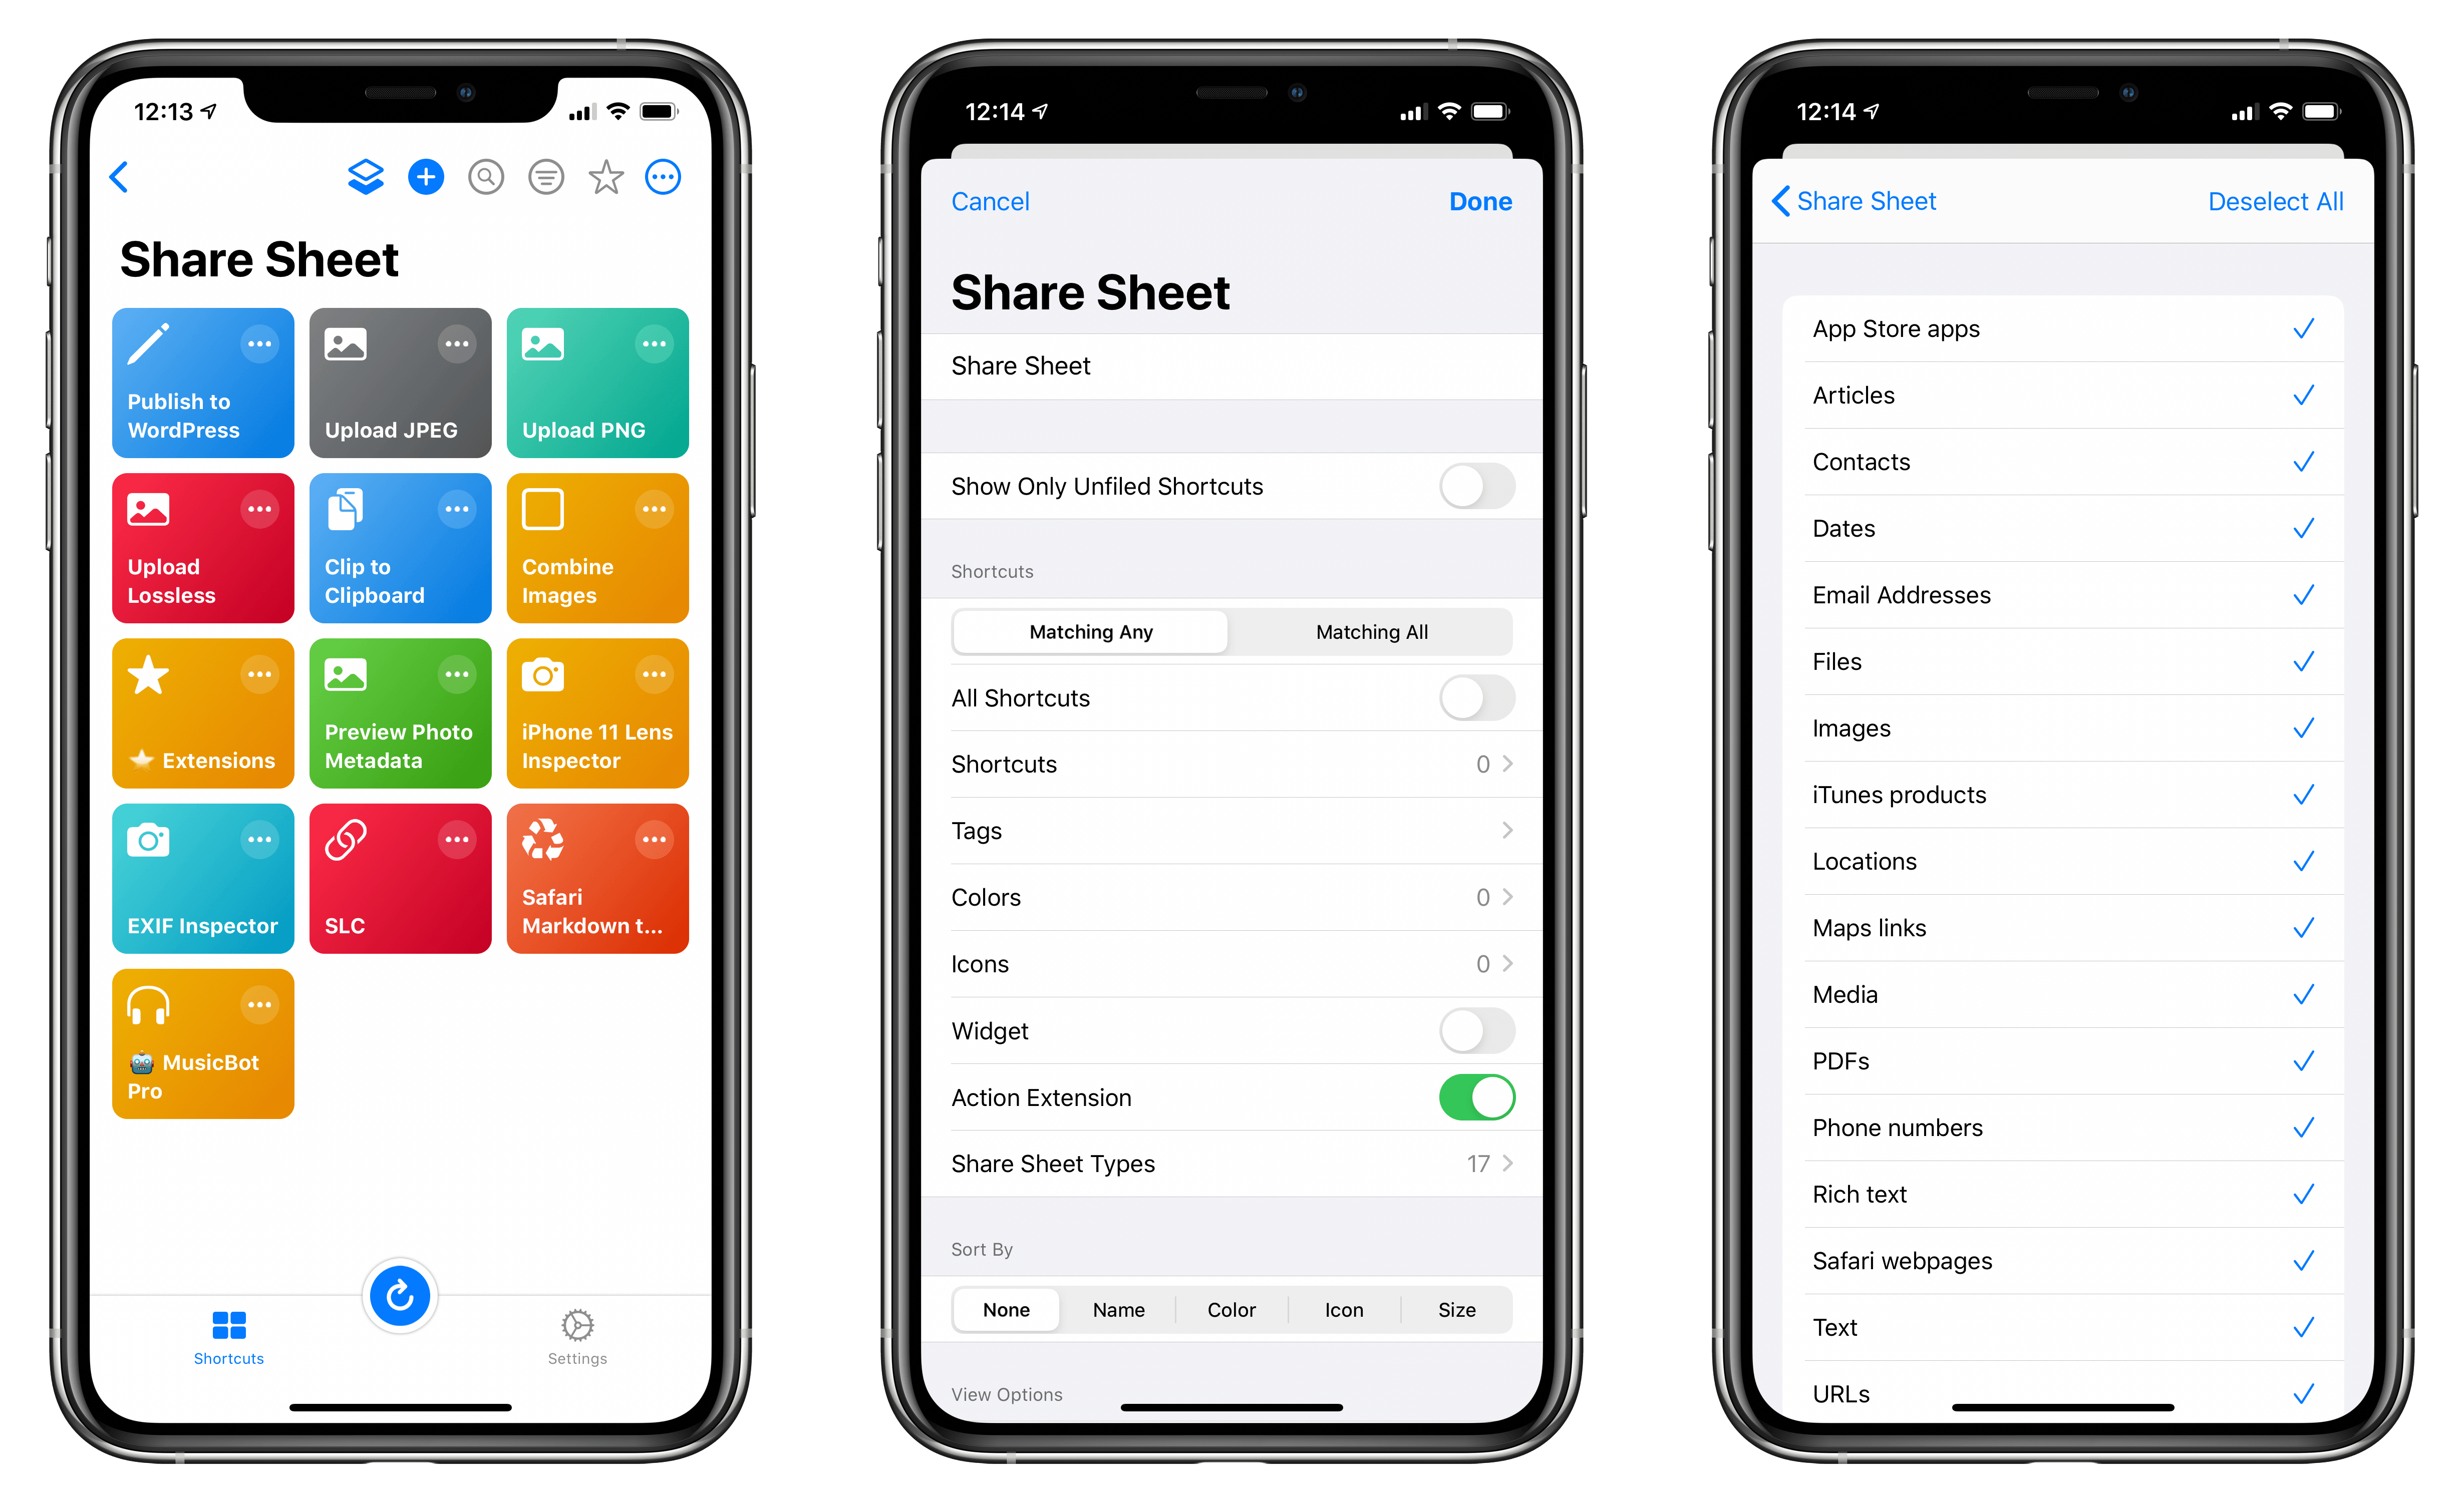 You can create a smart folder that shows you shortcuts you've enabled for use in the share sheet.